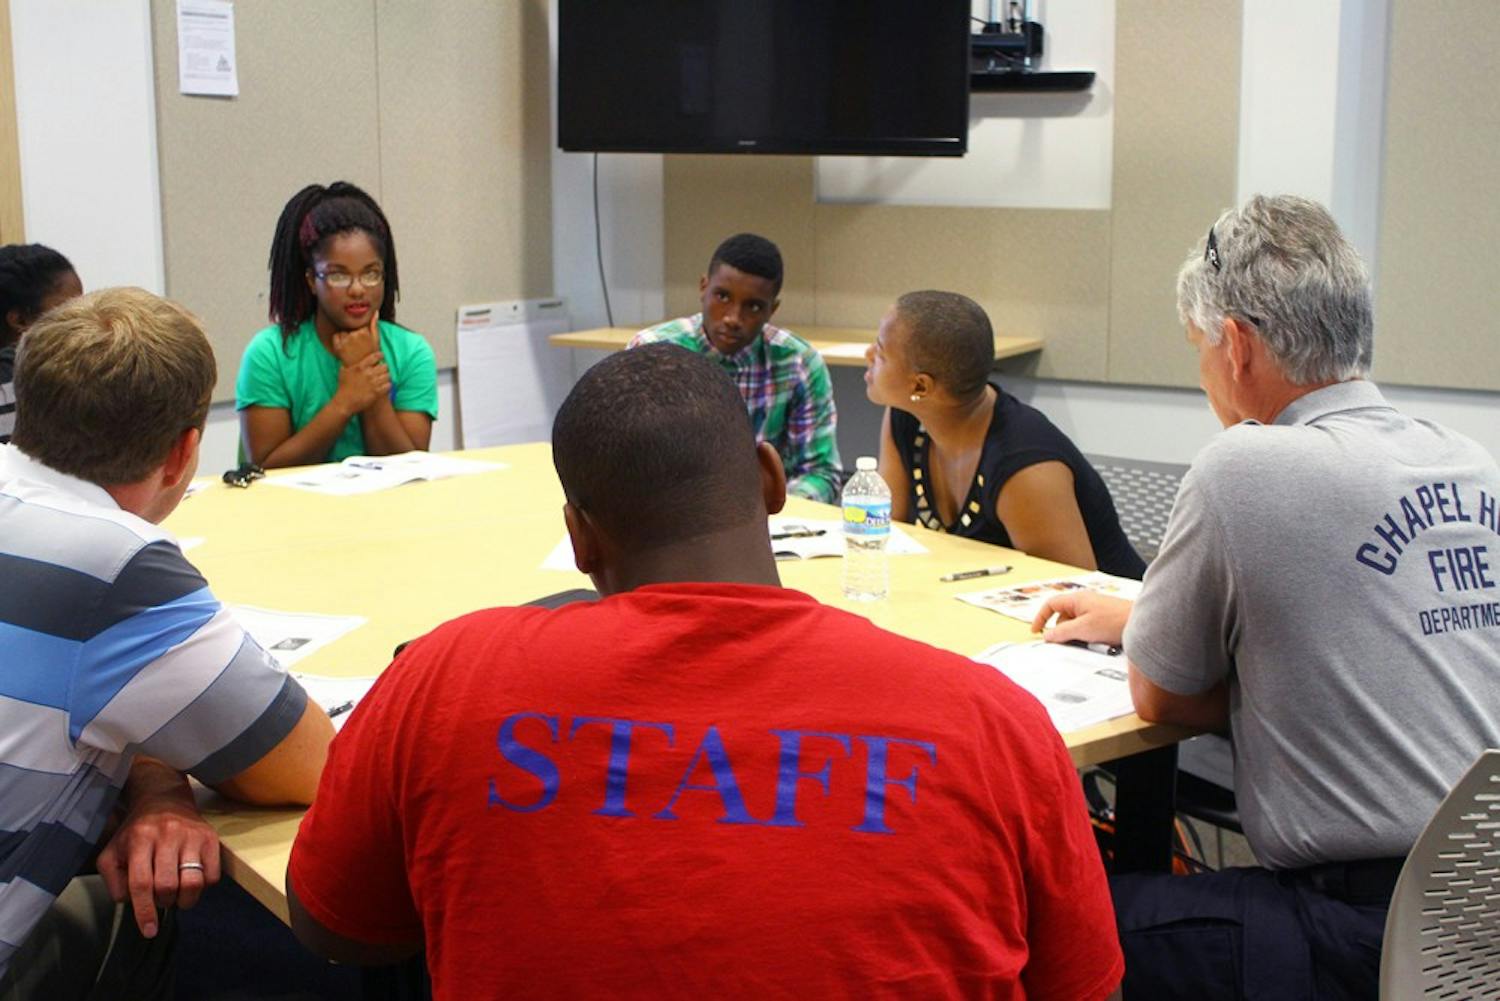 (Far left) Hargraves Community Center counselor Jazmine Mason-Carter brainstorms safety ideas with other trainees.